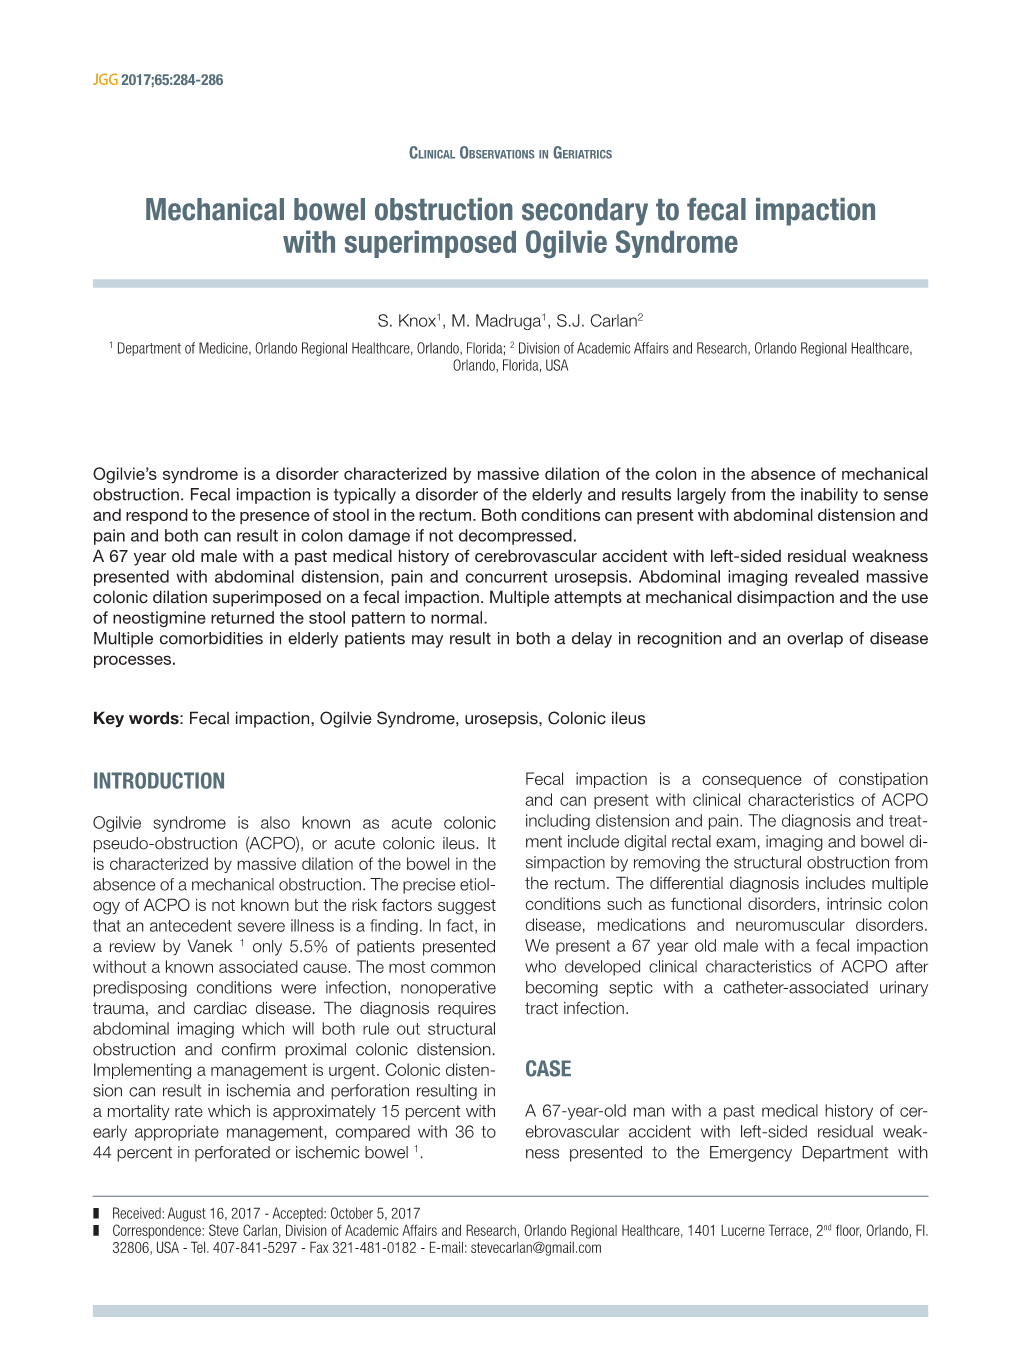 Mechanical Bowel Obstruction Secondary to Fecal Impaction with Superimposed Ogilvie Syndrome